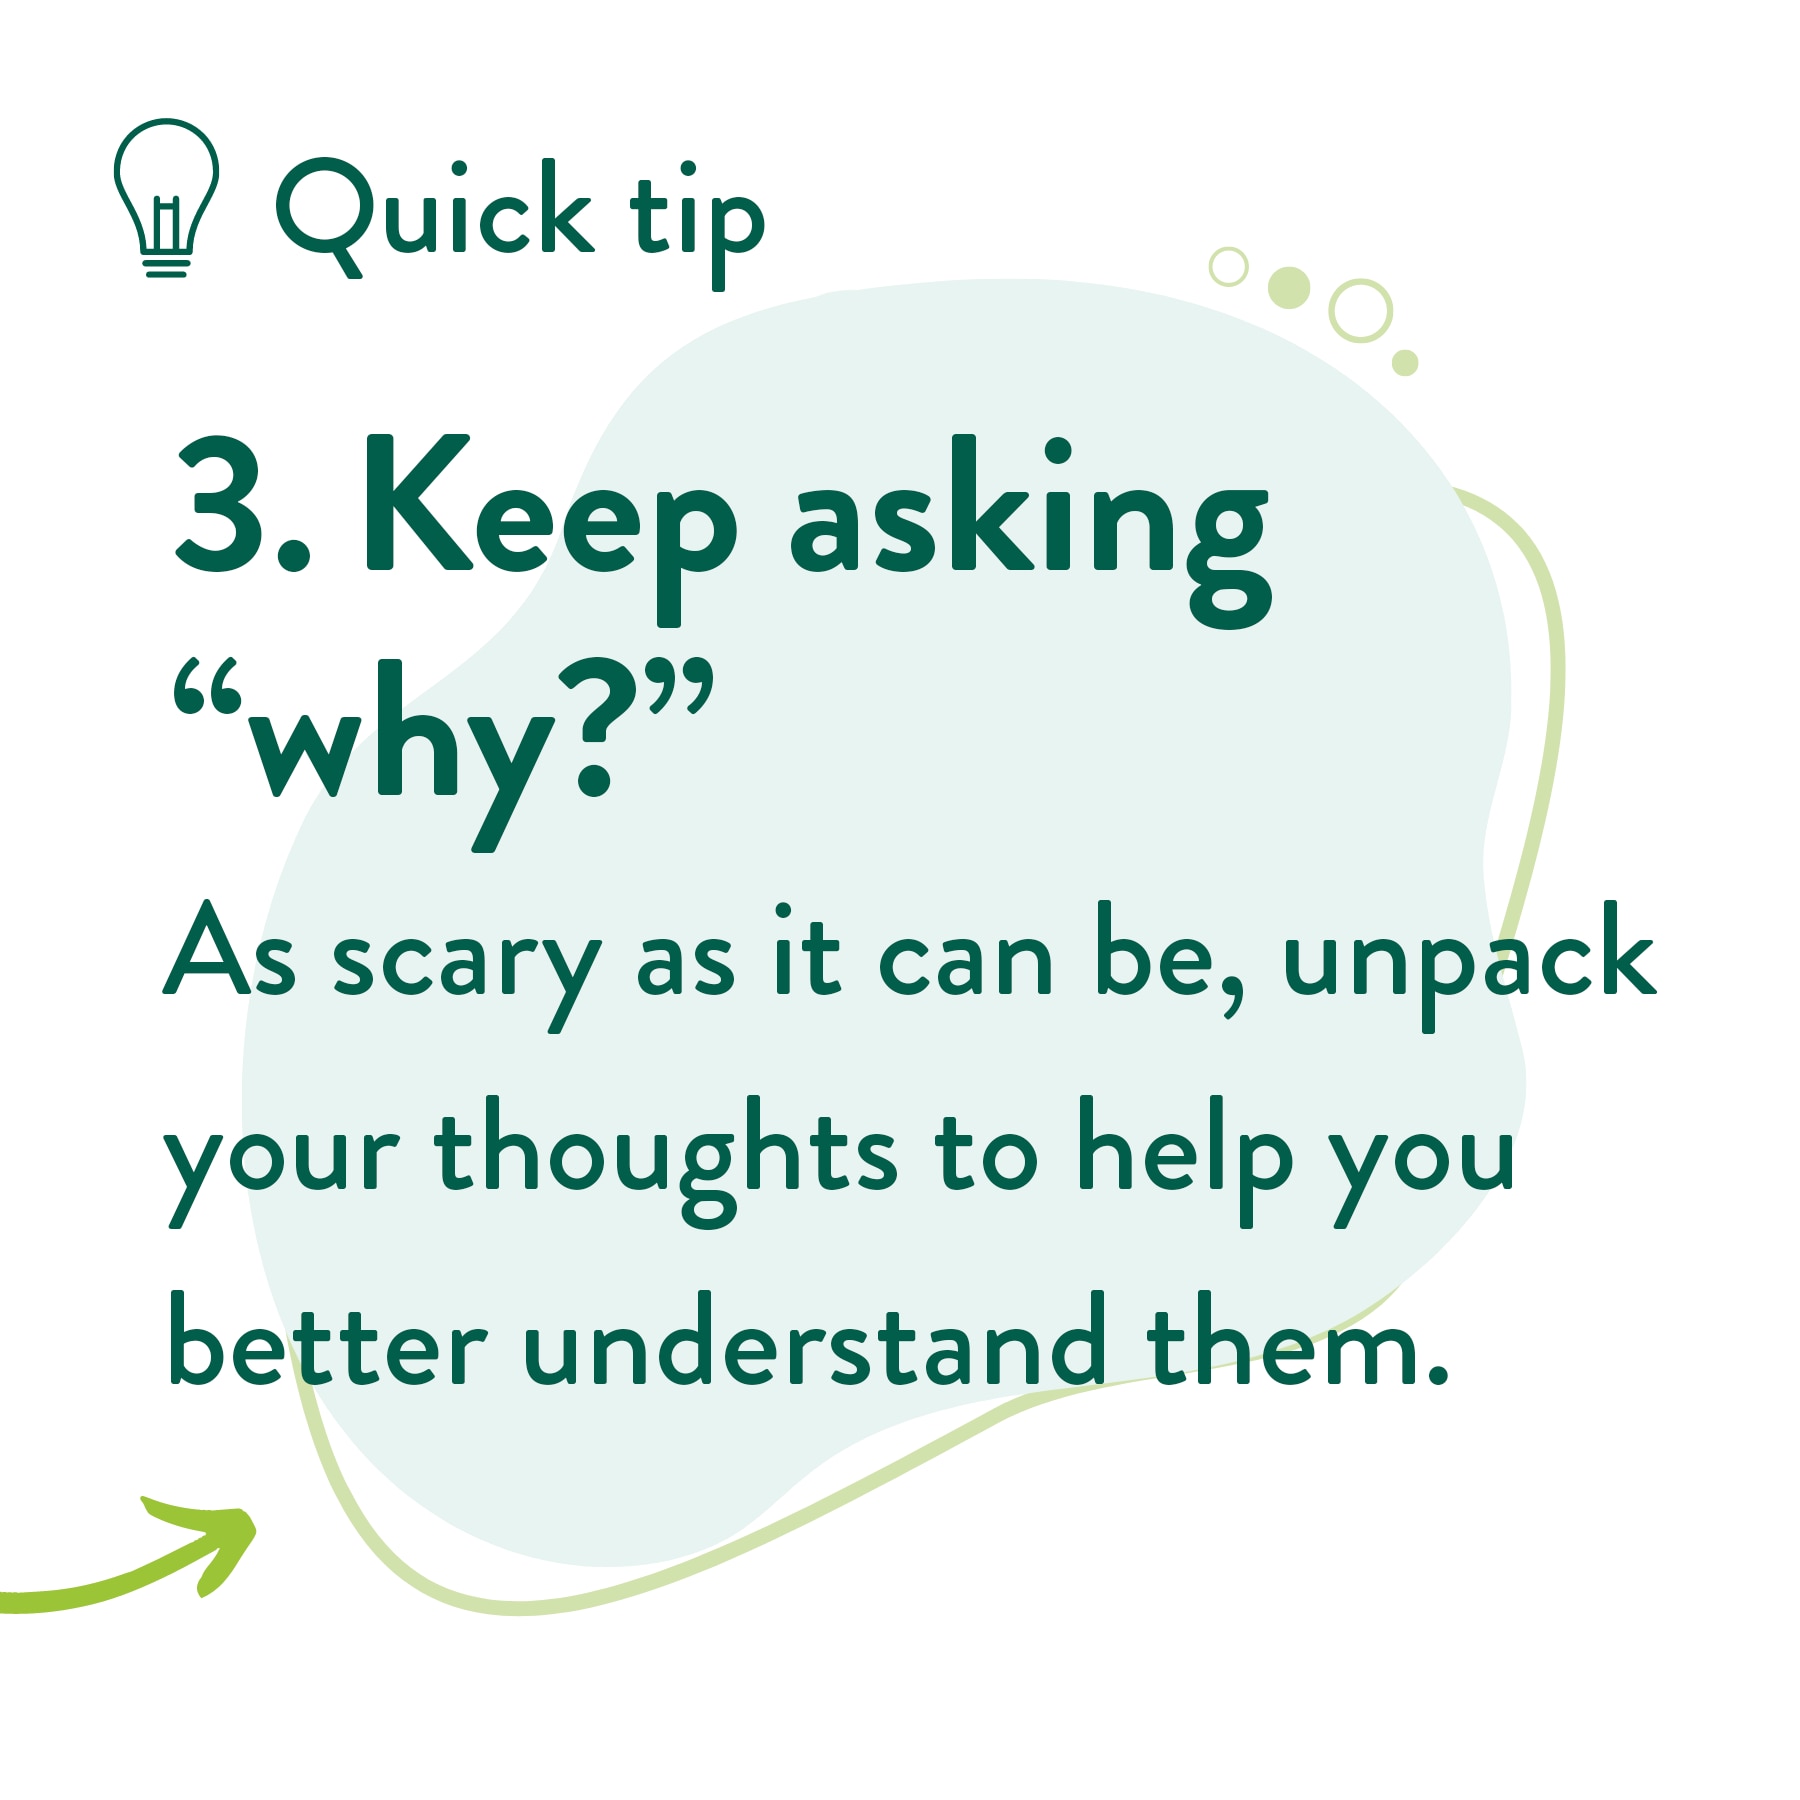 As scary as it can be, unpack your thoughts to help you better understand them. 